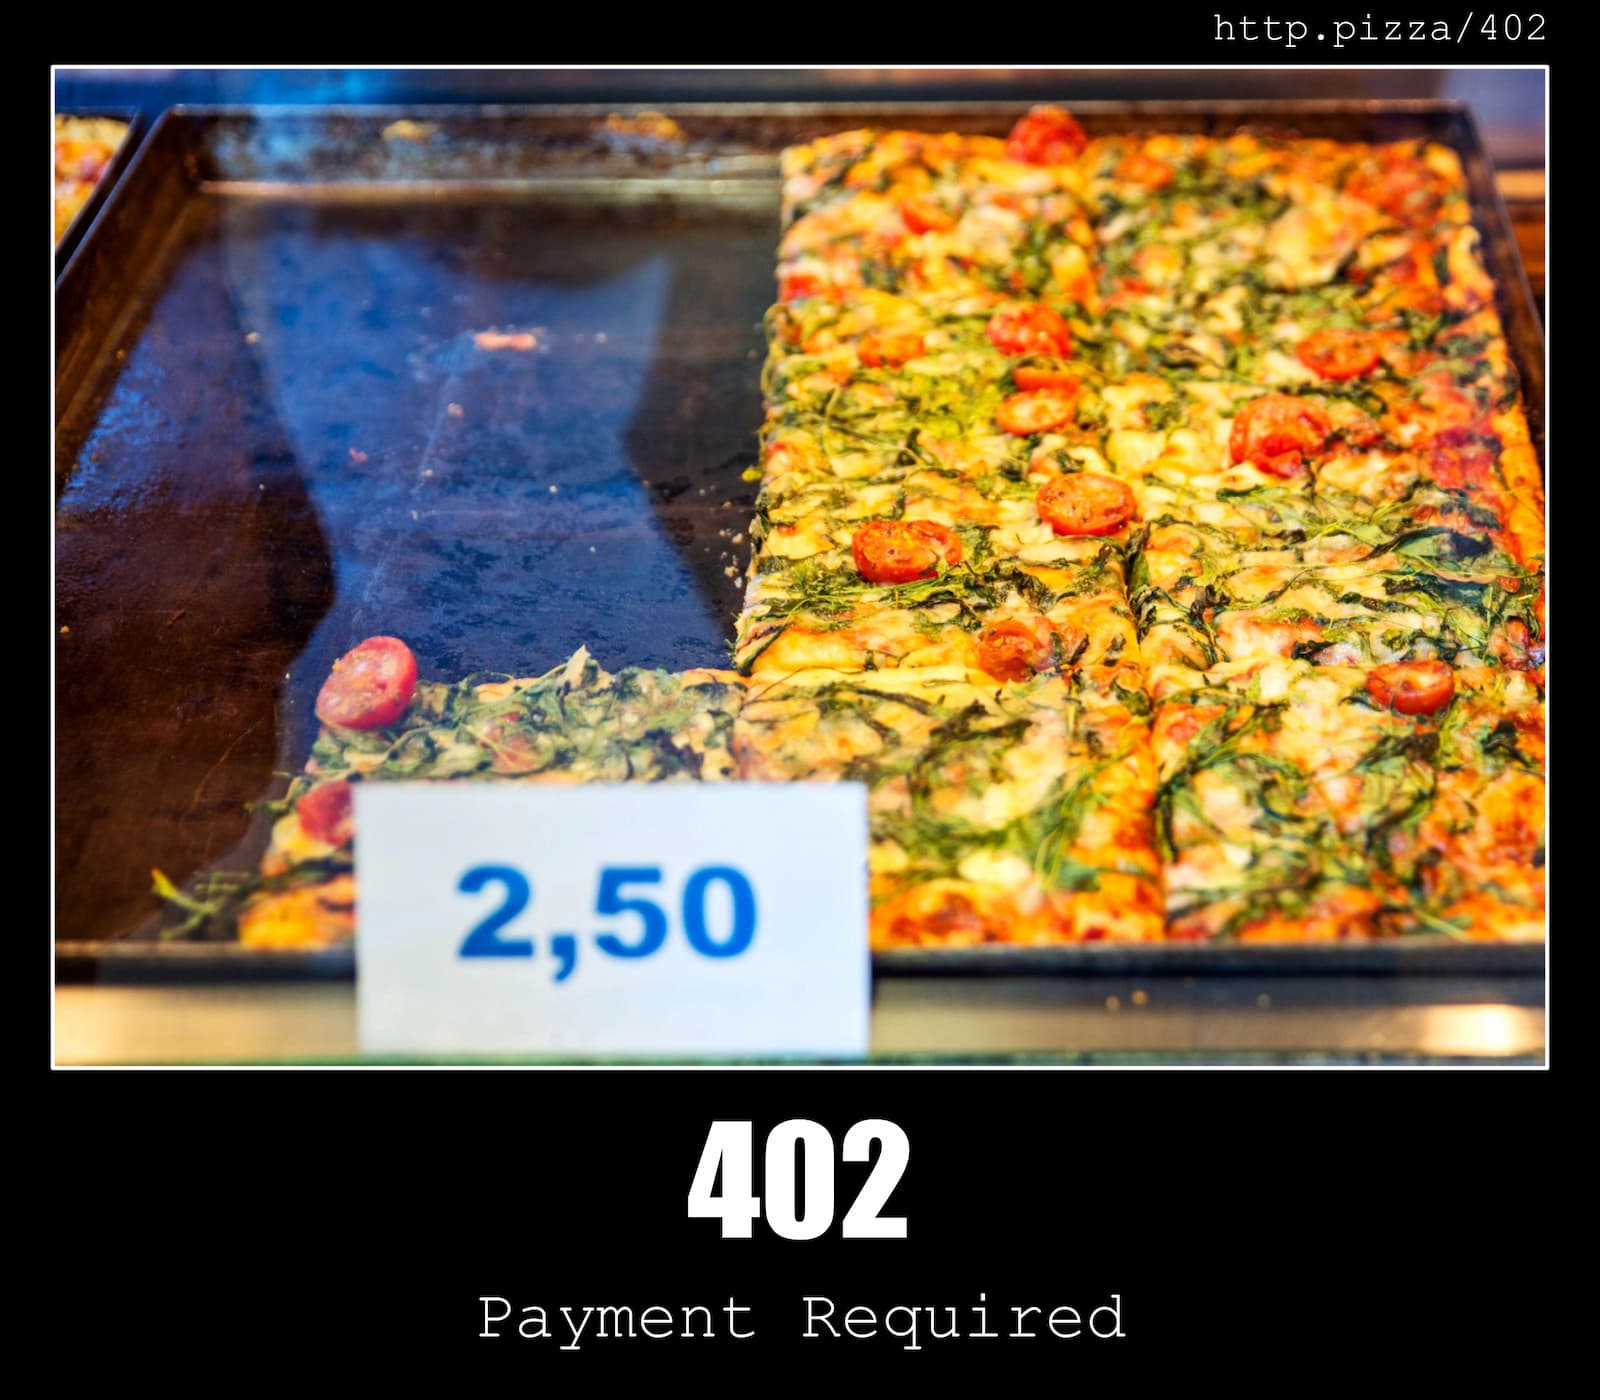 HTTP Status Code 402 Payment Required & Pizzas